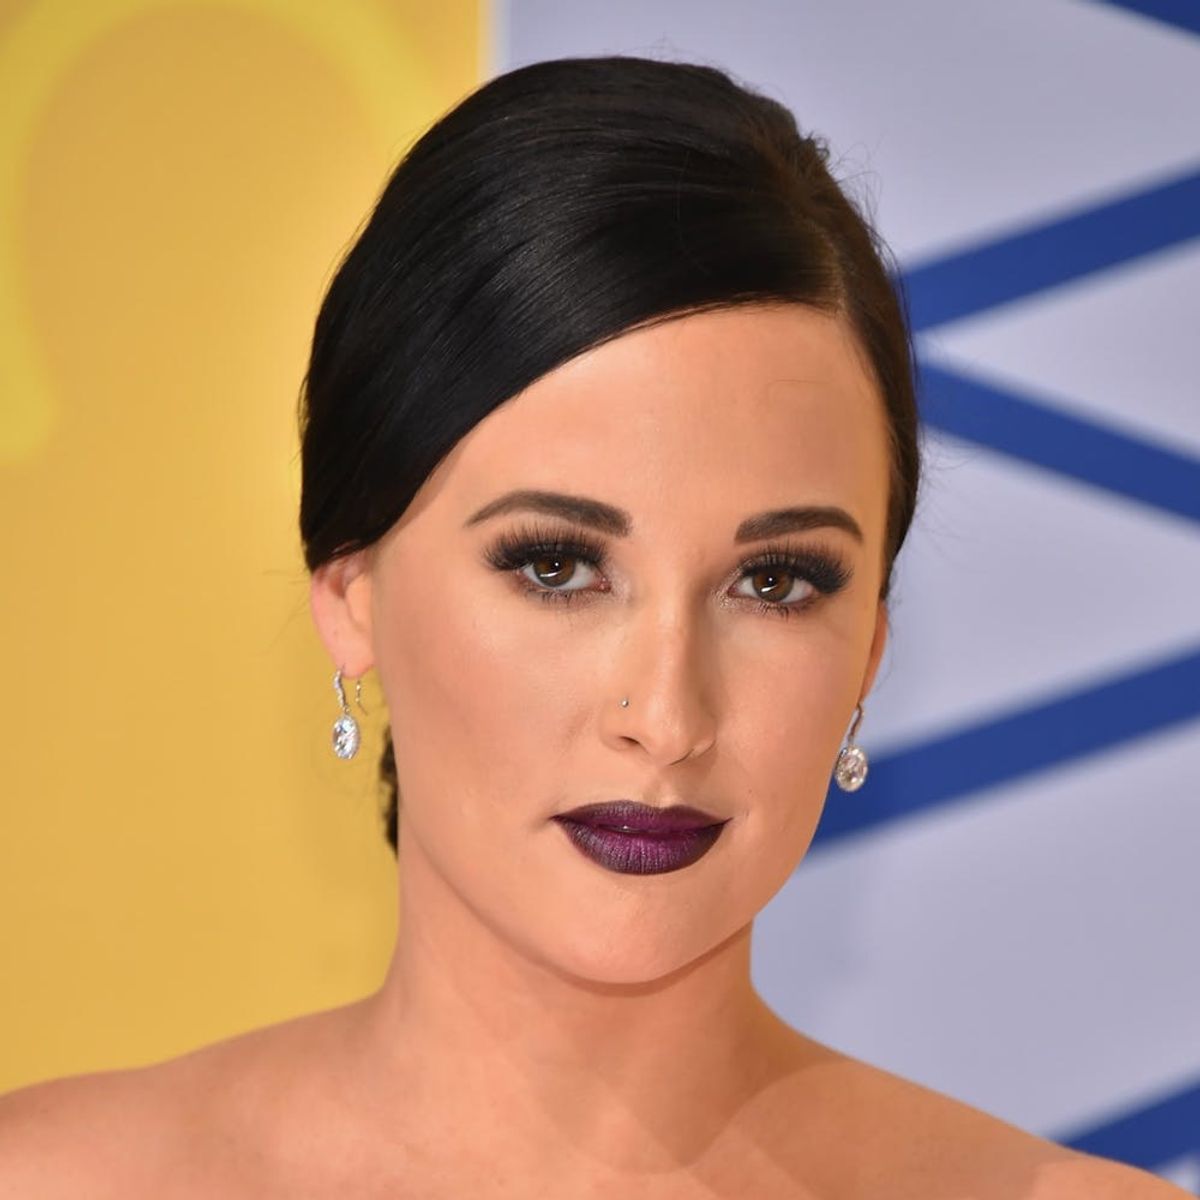 Vampy Lips Were the Unexpected Beauty Trend Taking Over the CMA Awards Red Carpet